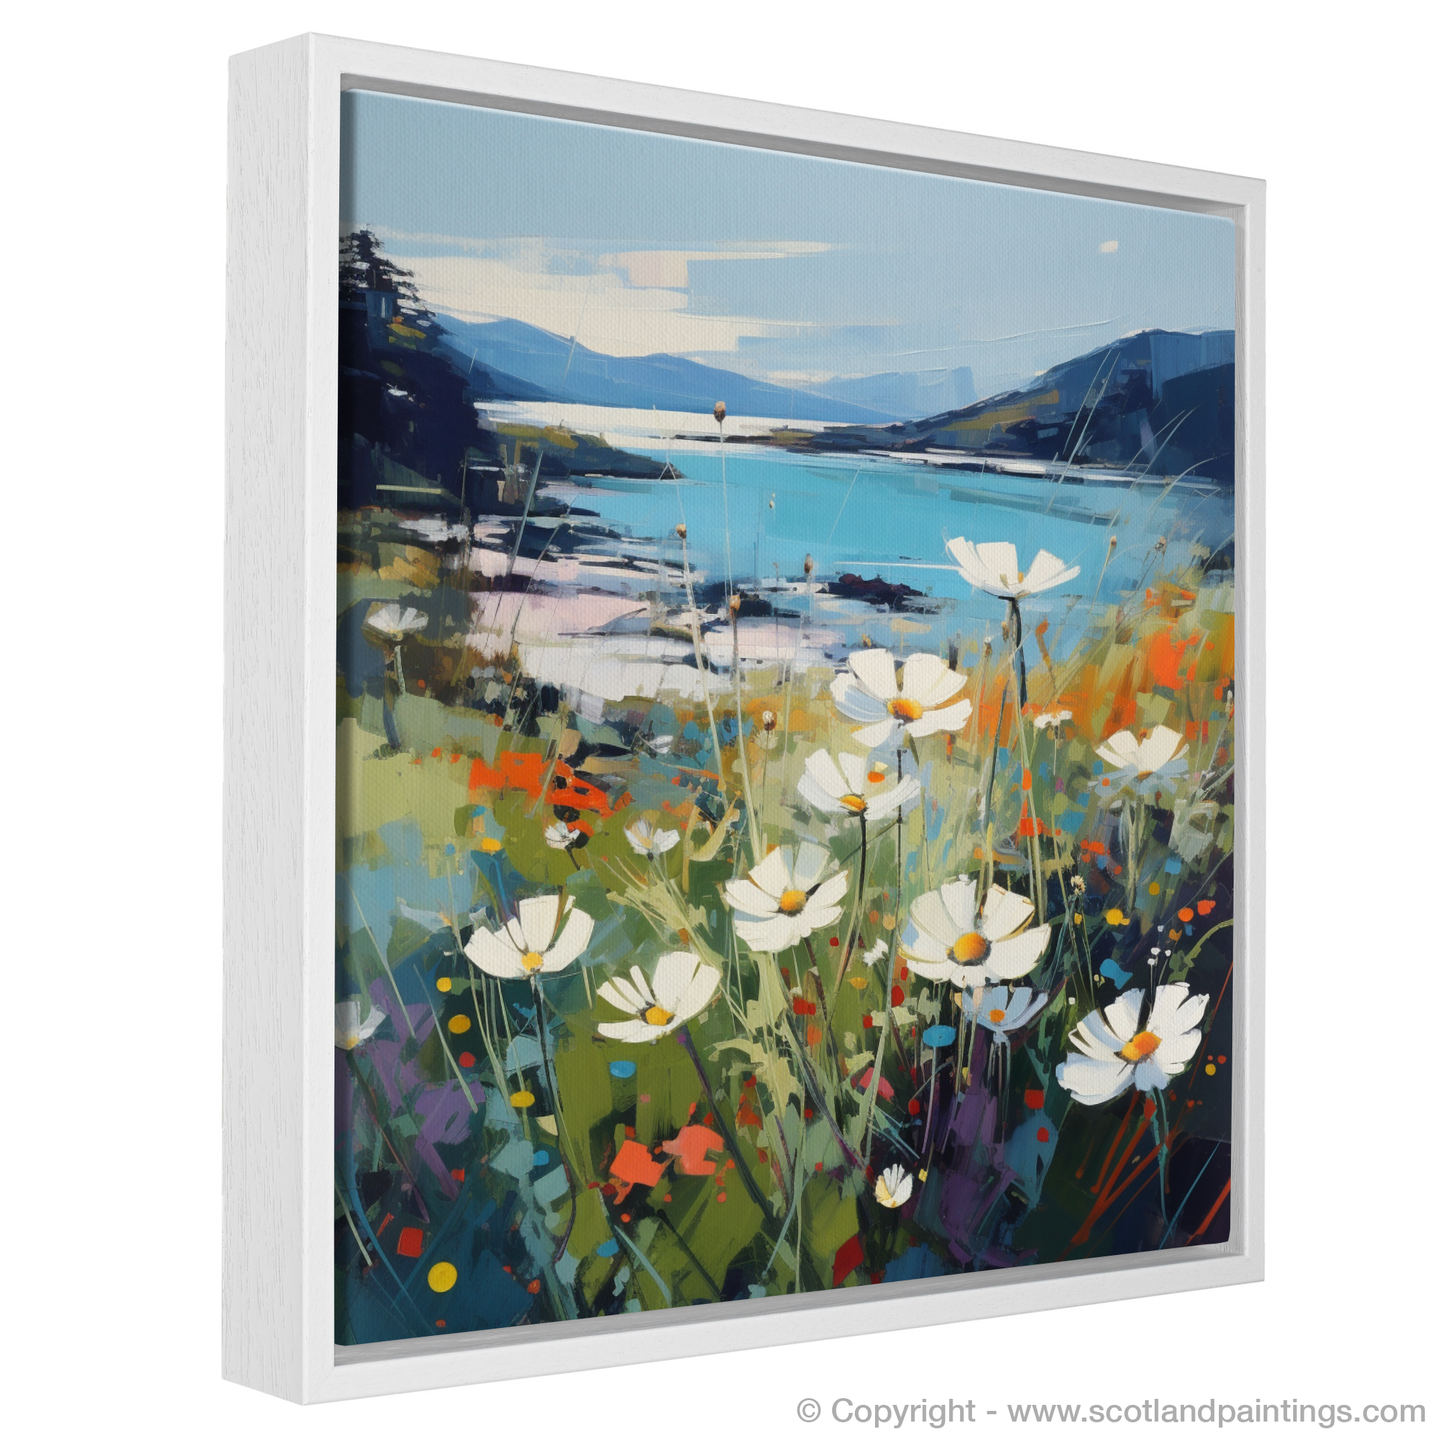 Painting and Art Print of Wildflowers by Loch Lomond entitled "Wildflowers by Loch Lomond: A Contemporary Ode to Natural Splendour".